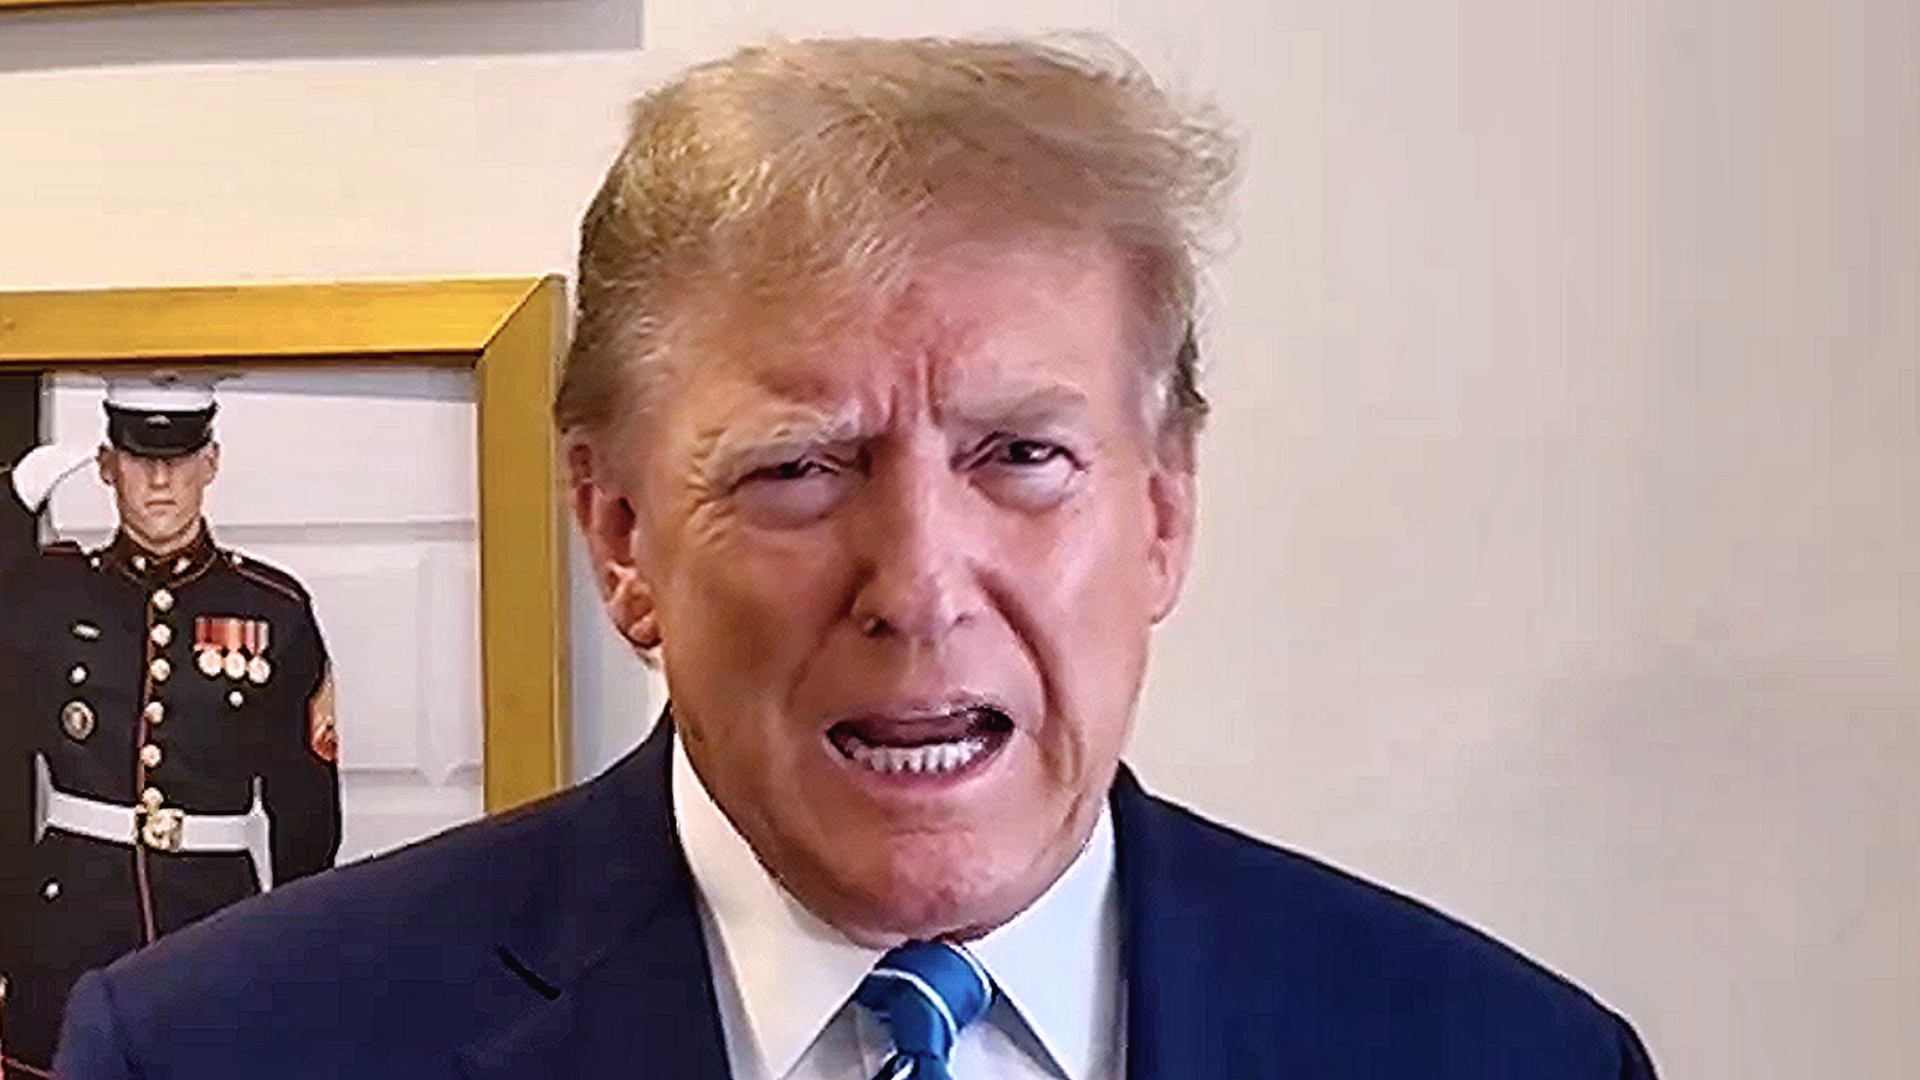 Trump Rants Into The Dead of Night To ‘Fight Anti-White Racism’ In Social Media Blizzard